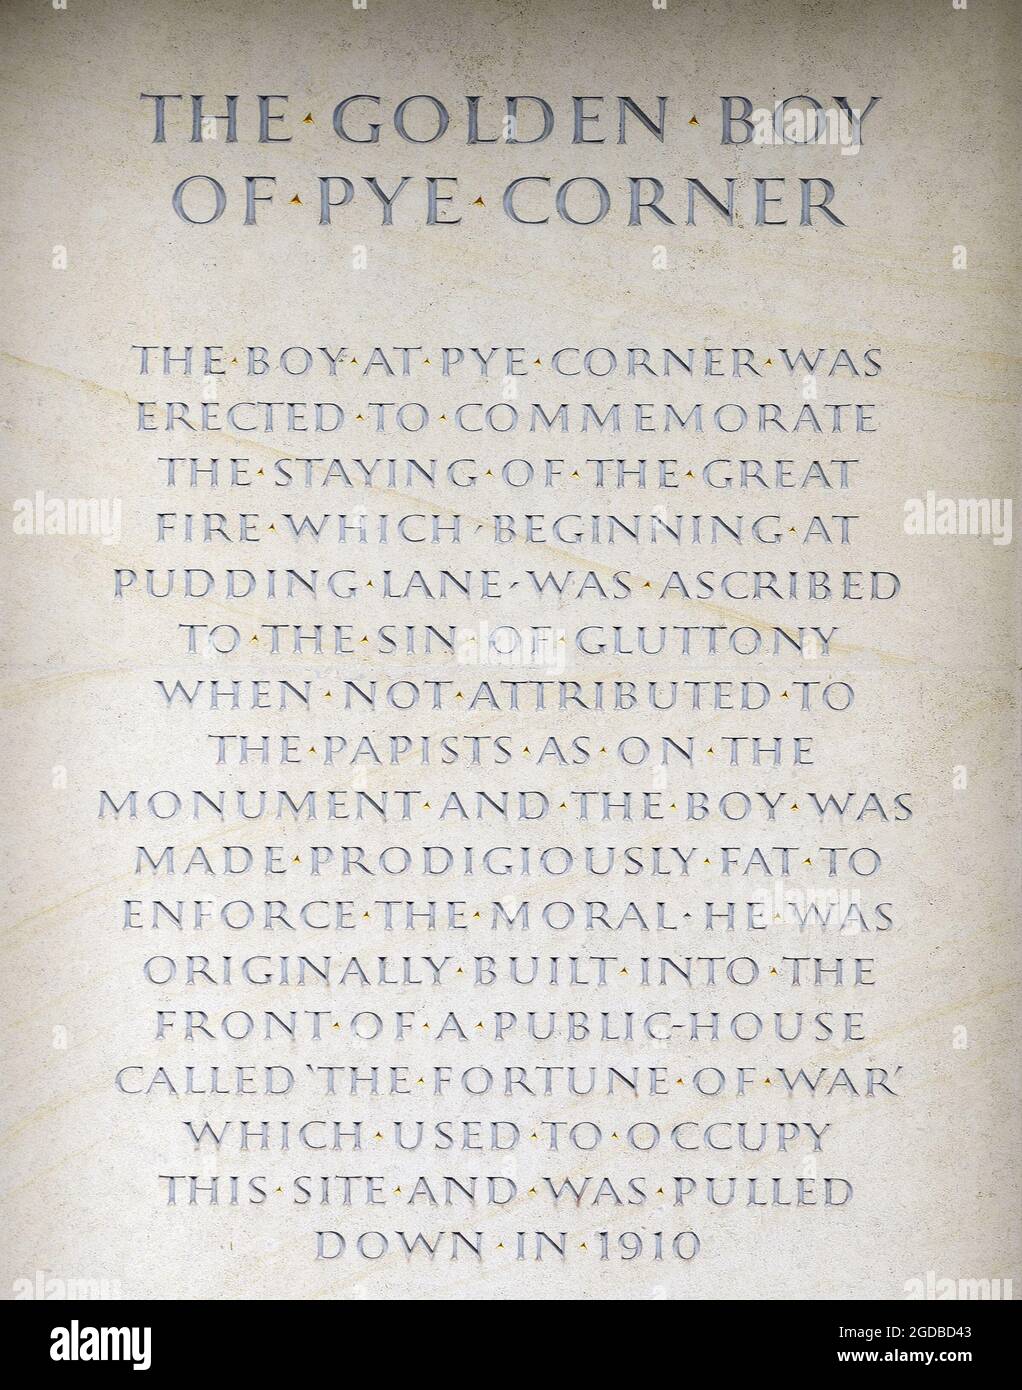 London, England, UK. The Golden Boy of Pye Corner - monument to commemorate the end of the Great Fire of London. Originally known as the 'Fat Boy', on Stock Photo